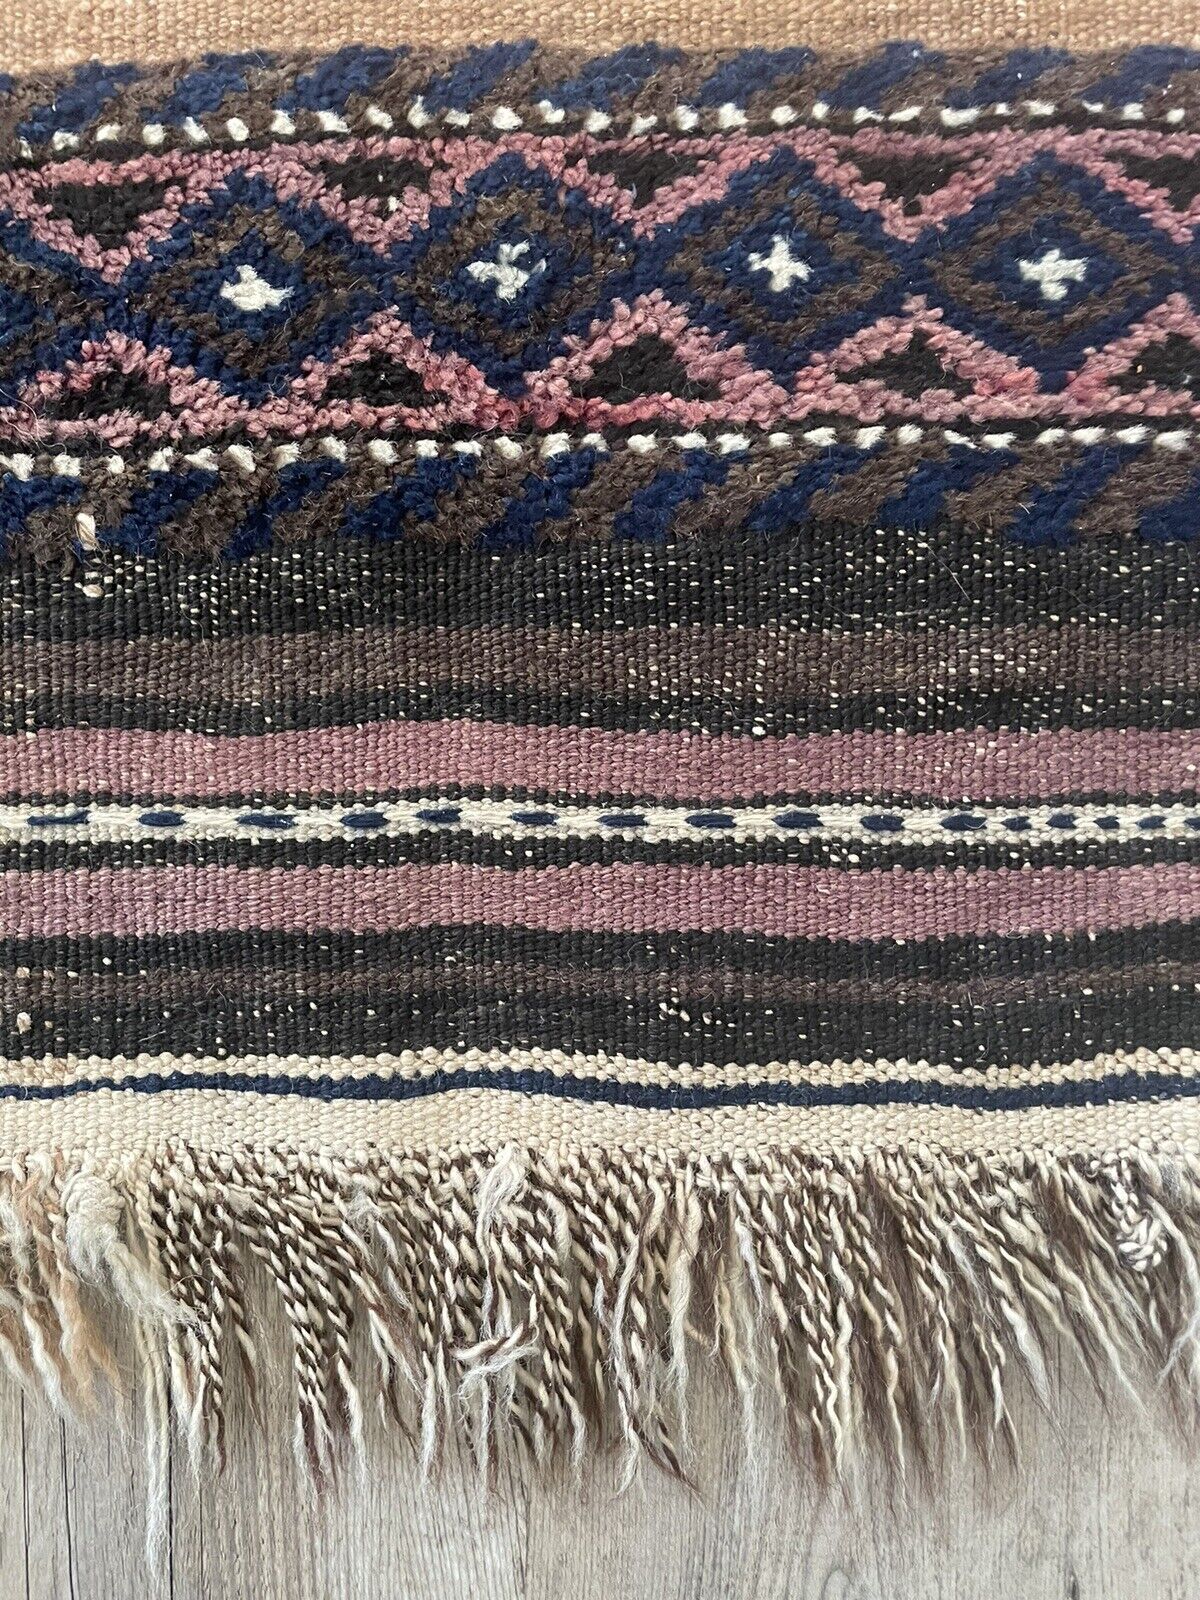 Close-up of kilim design on Handmade Antique Afghan Baluch Collectible Rug - Detailed view highlighting the flat-woven kilim design at the center of the rug, adding texture and visual interest.